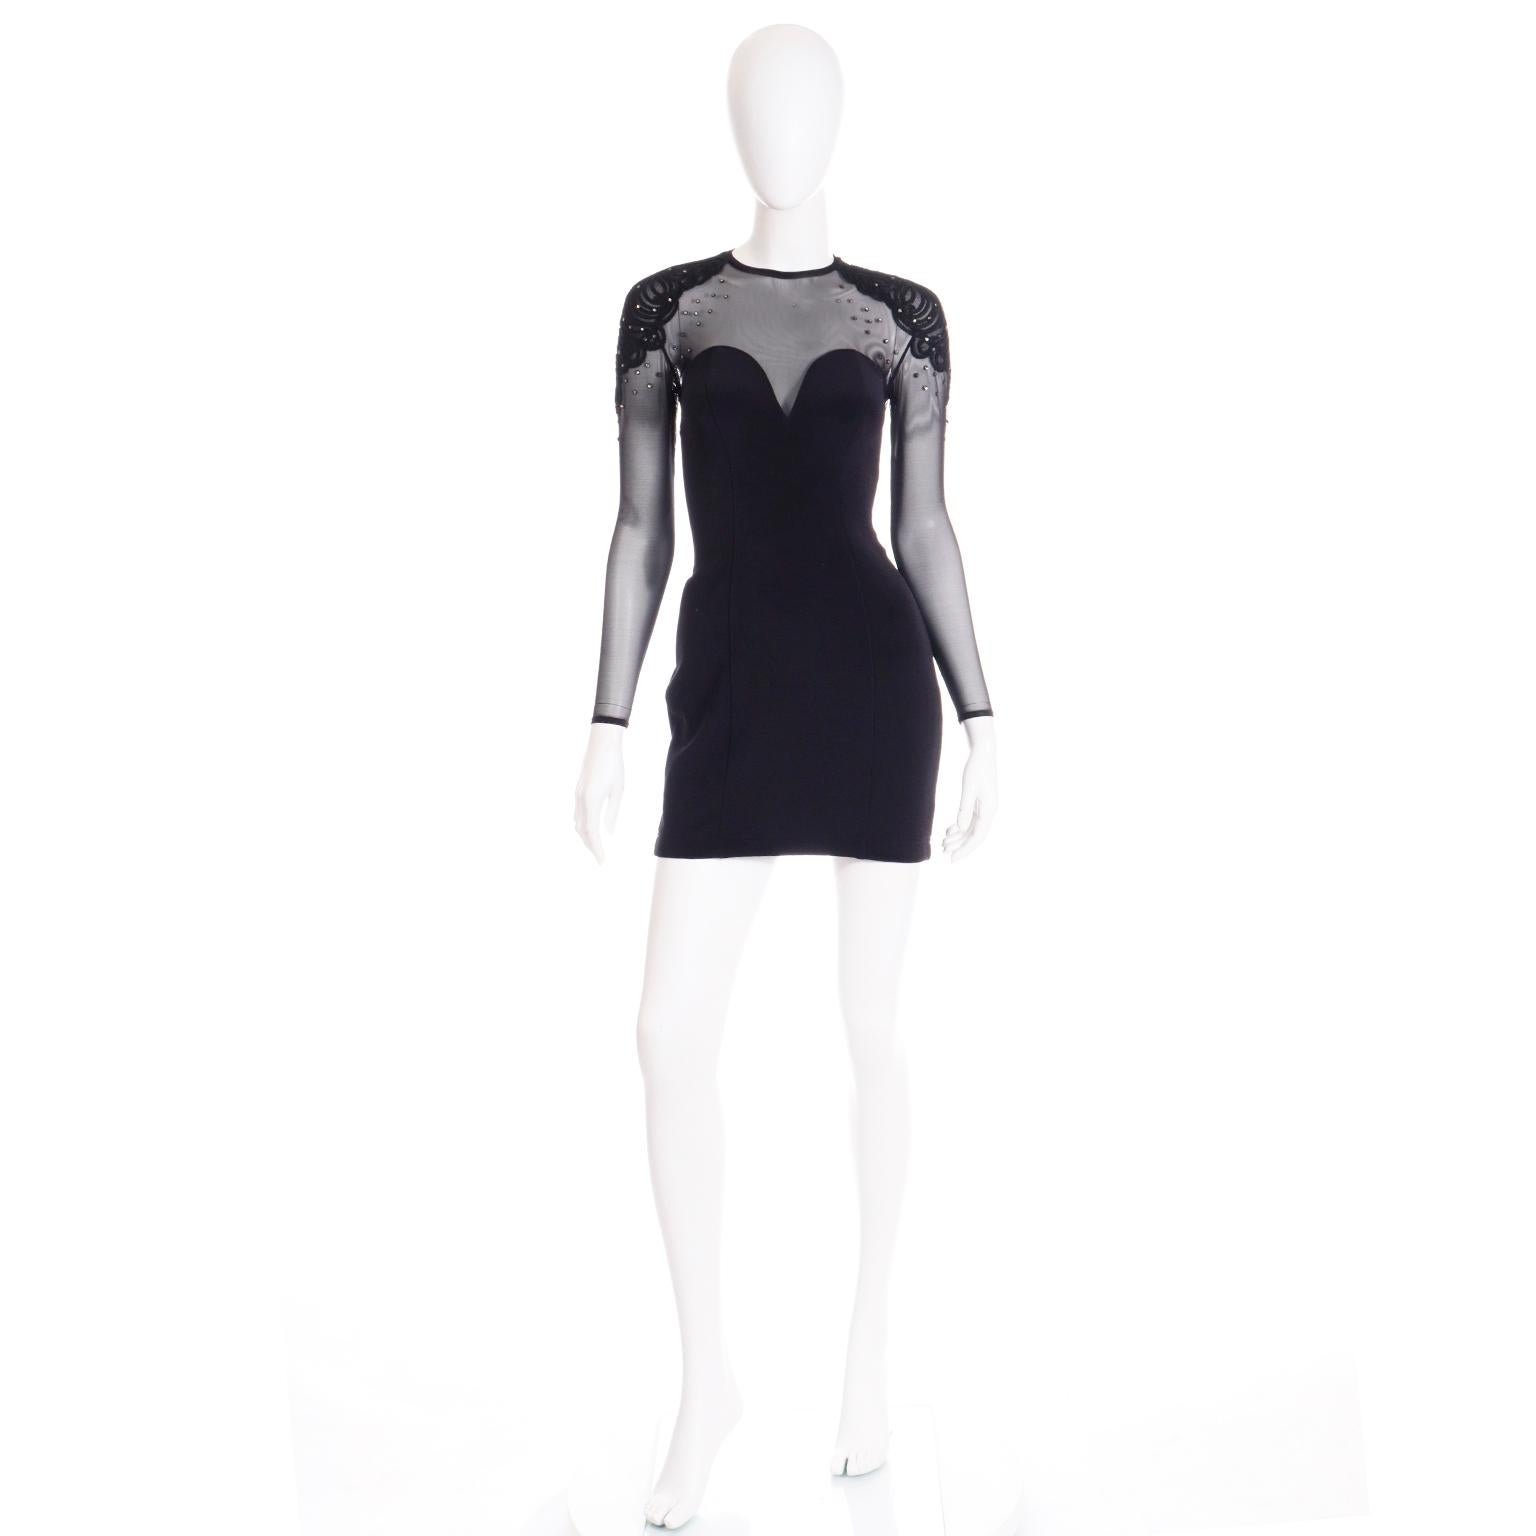 We always love vintage Tadashi evening dresses and this fun bodycon dress is a great example of his talent! This fun dress has the signature illusion bodice with sheer mesh continuing down the long sleeves. The shoulders are embellished with black